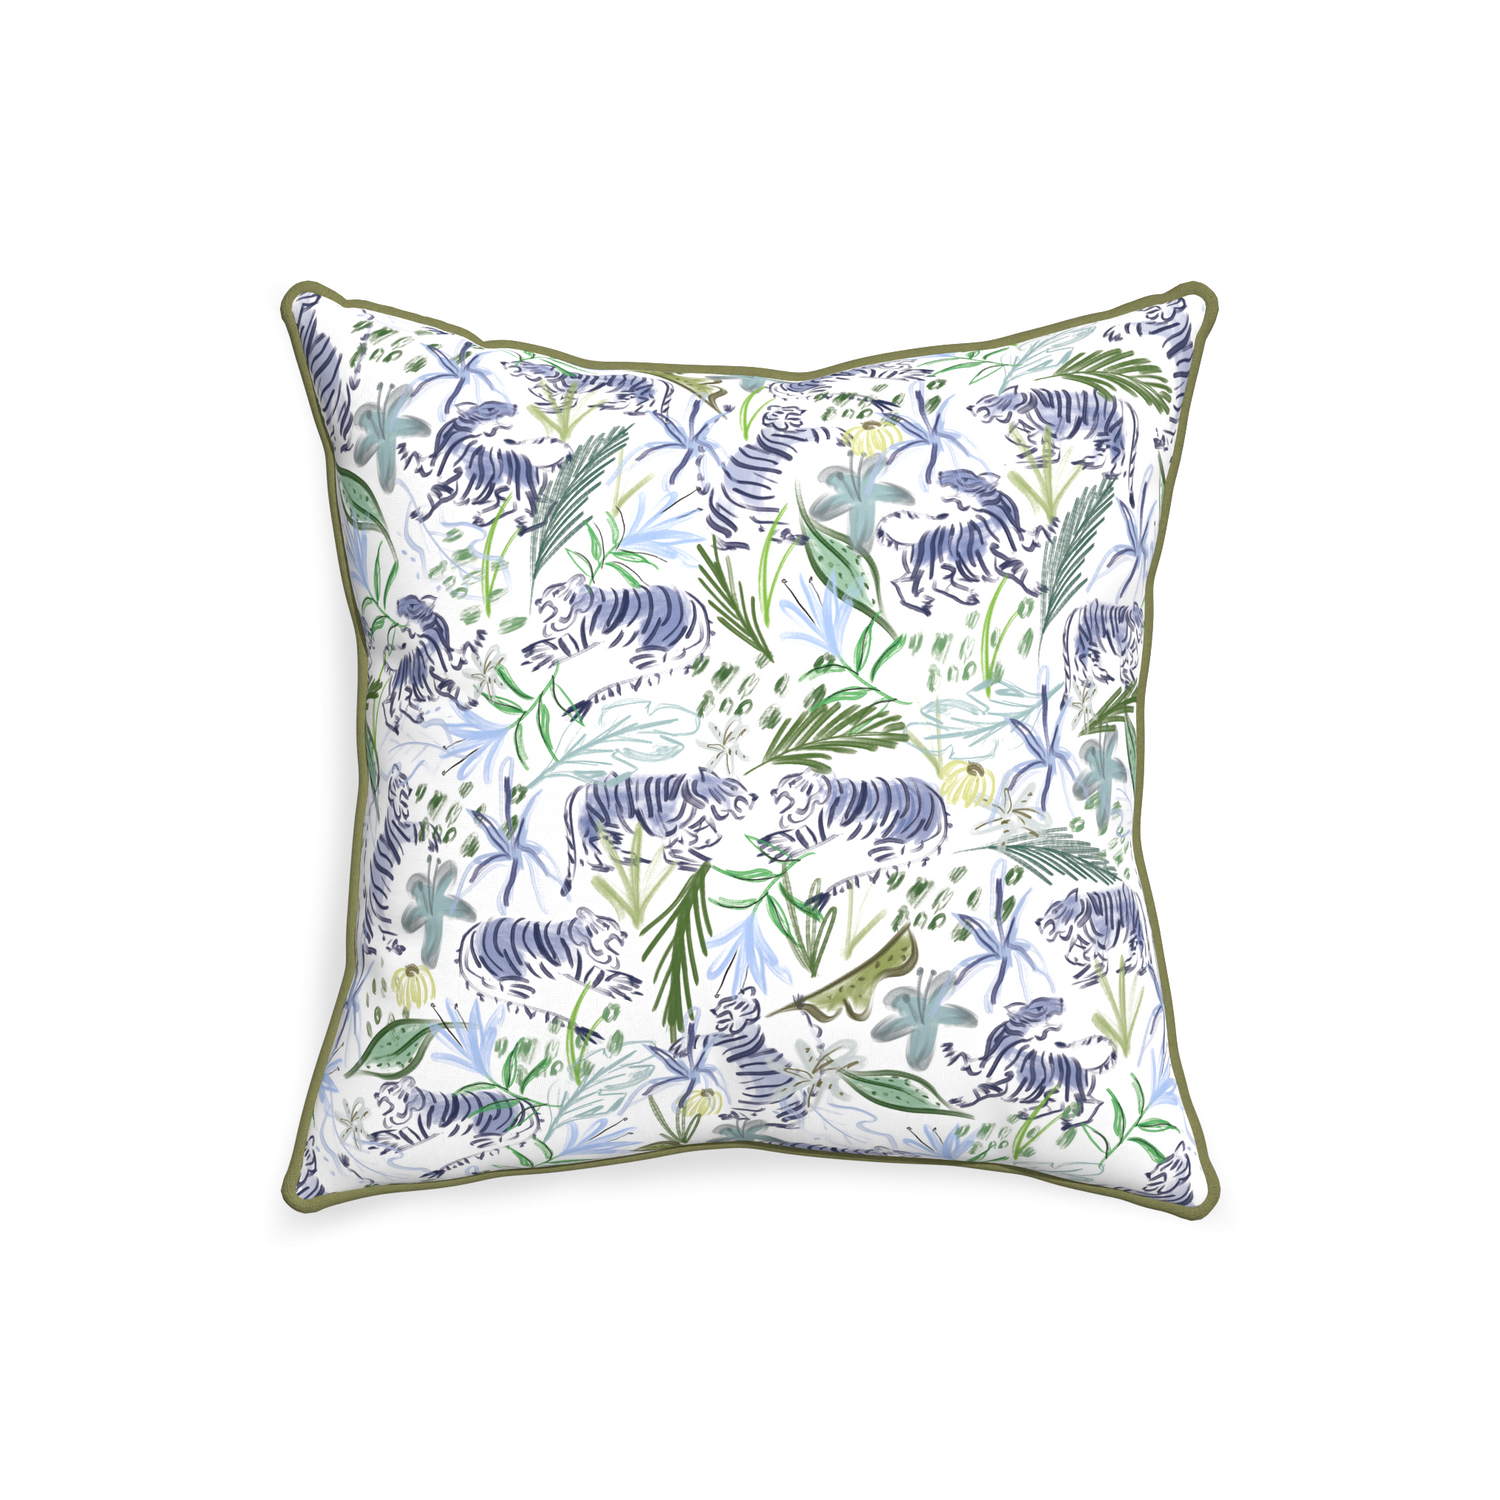 20-square frida green custom pillow with moss piping on white background